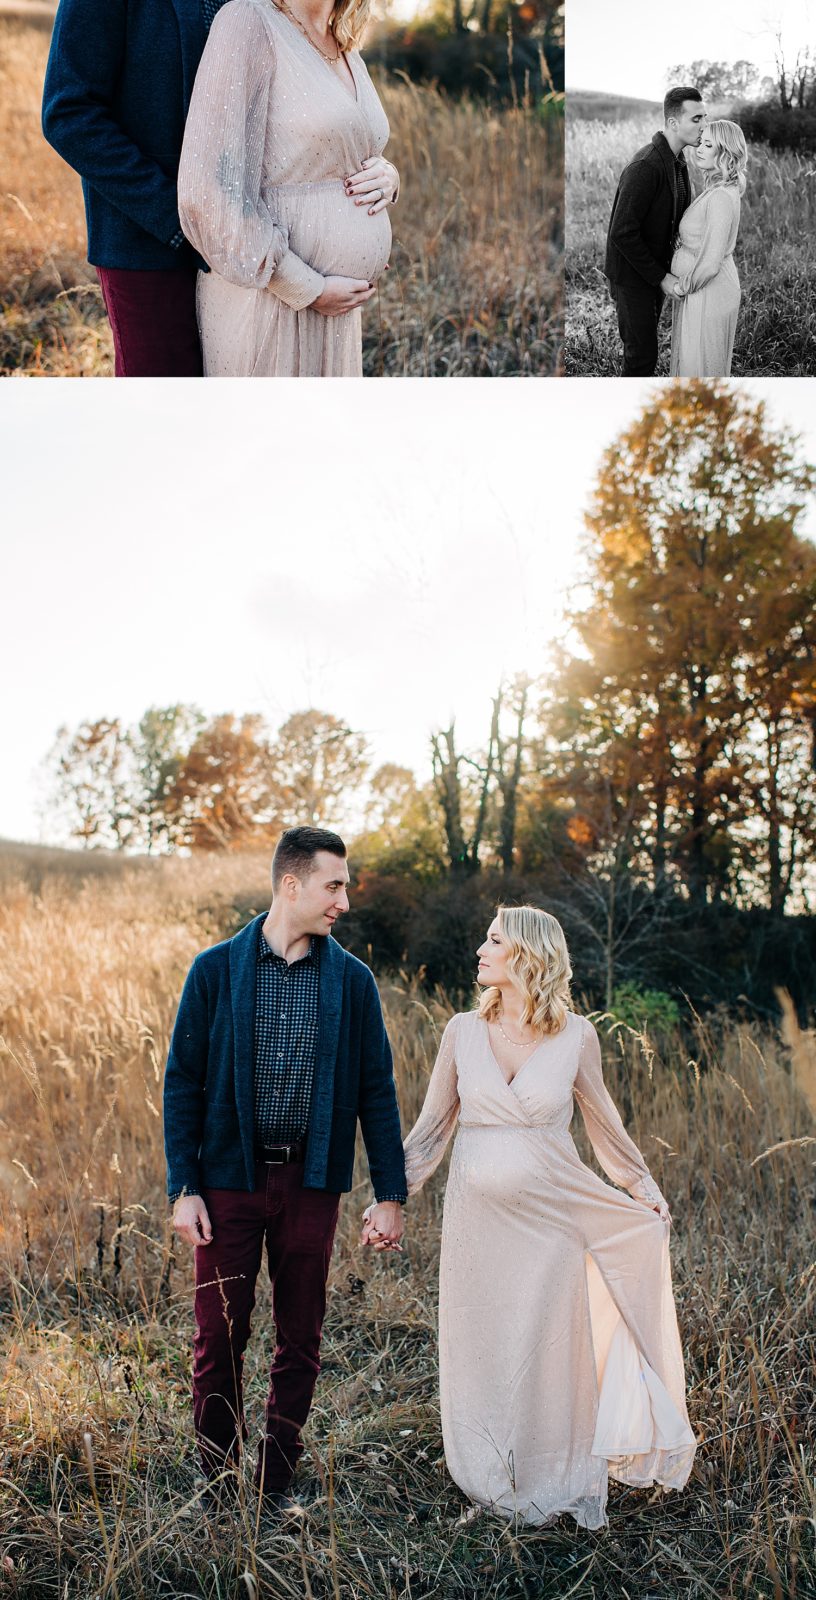 Expecting parents in a field in boho clothes for their maternity session with Michigan photographer Brittany Emerson